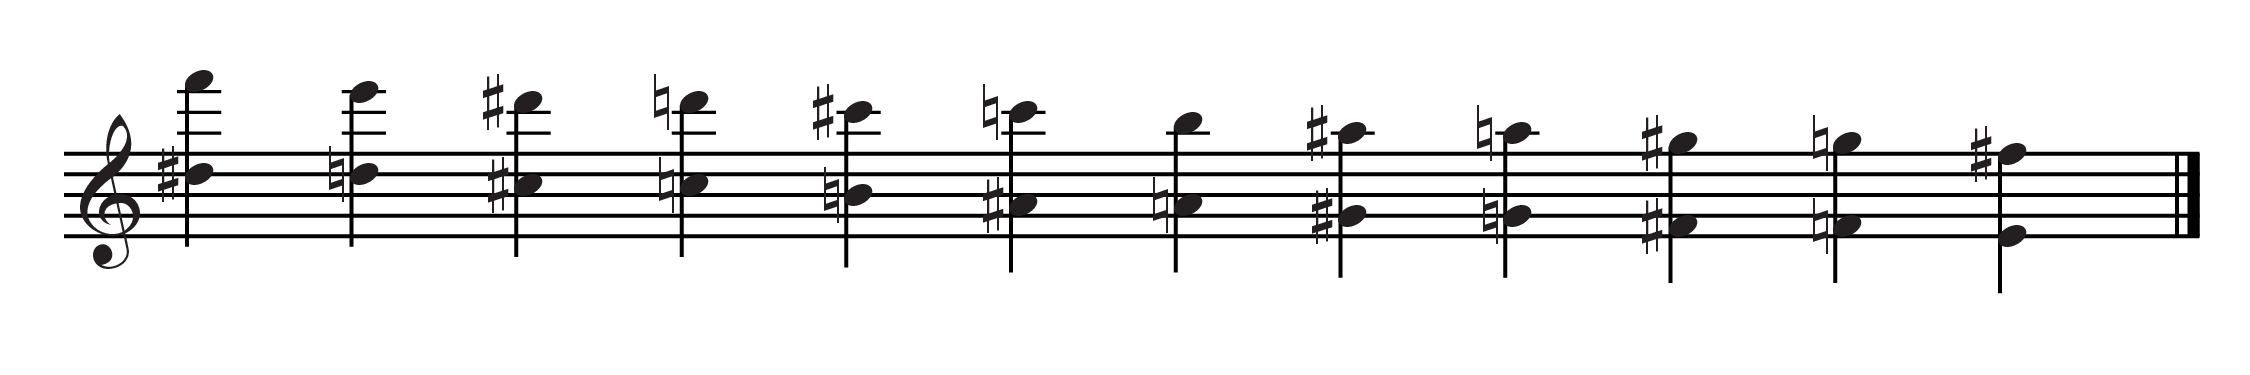 Notation of chain of multiphonics